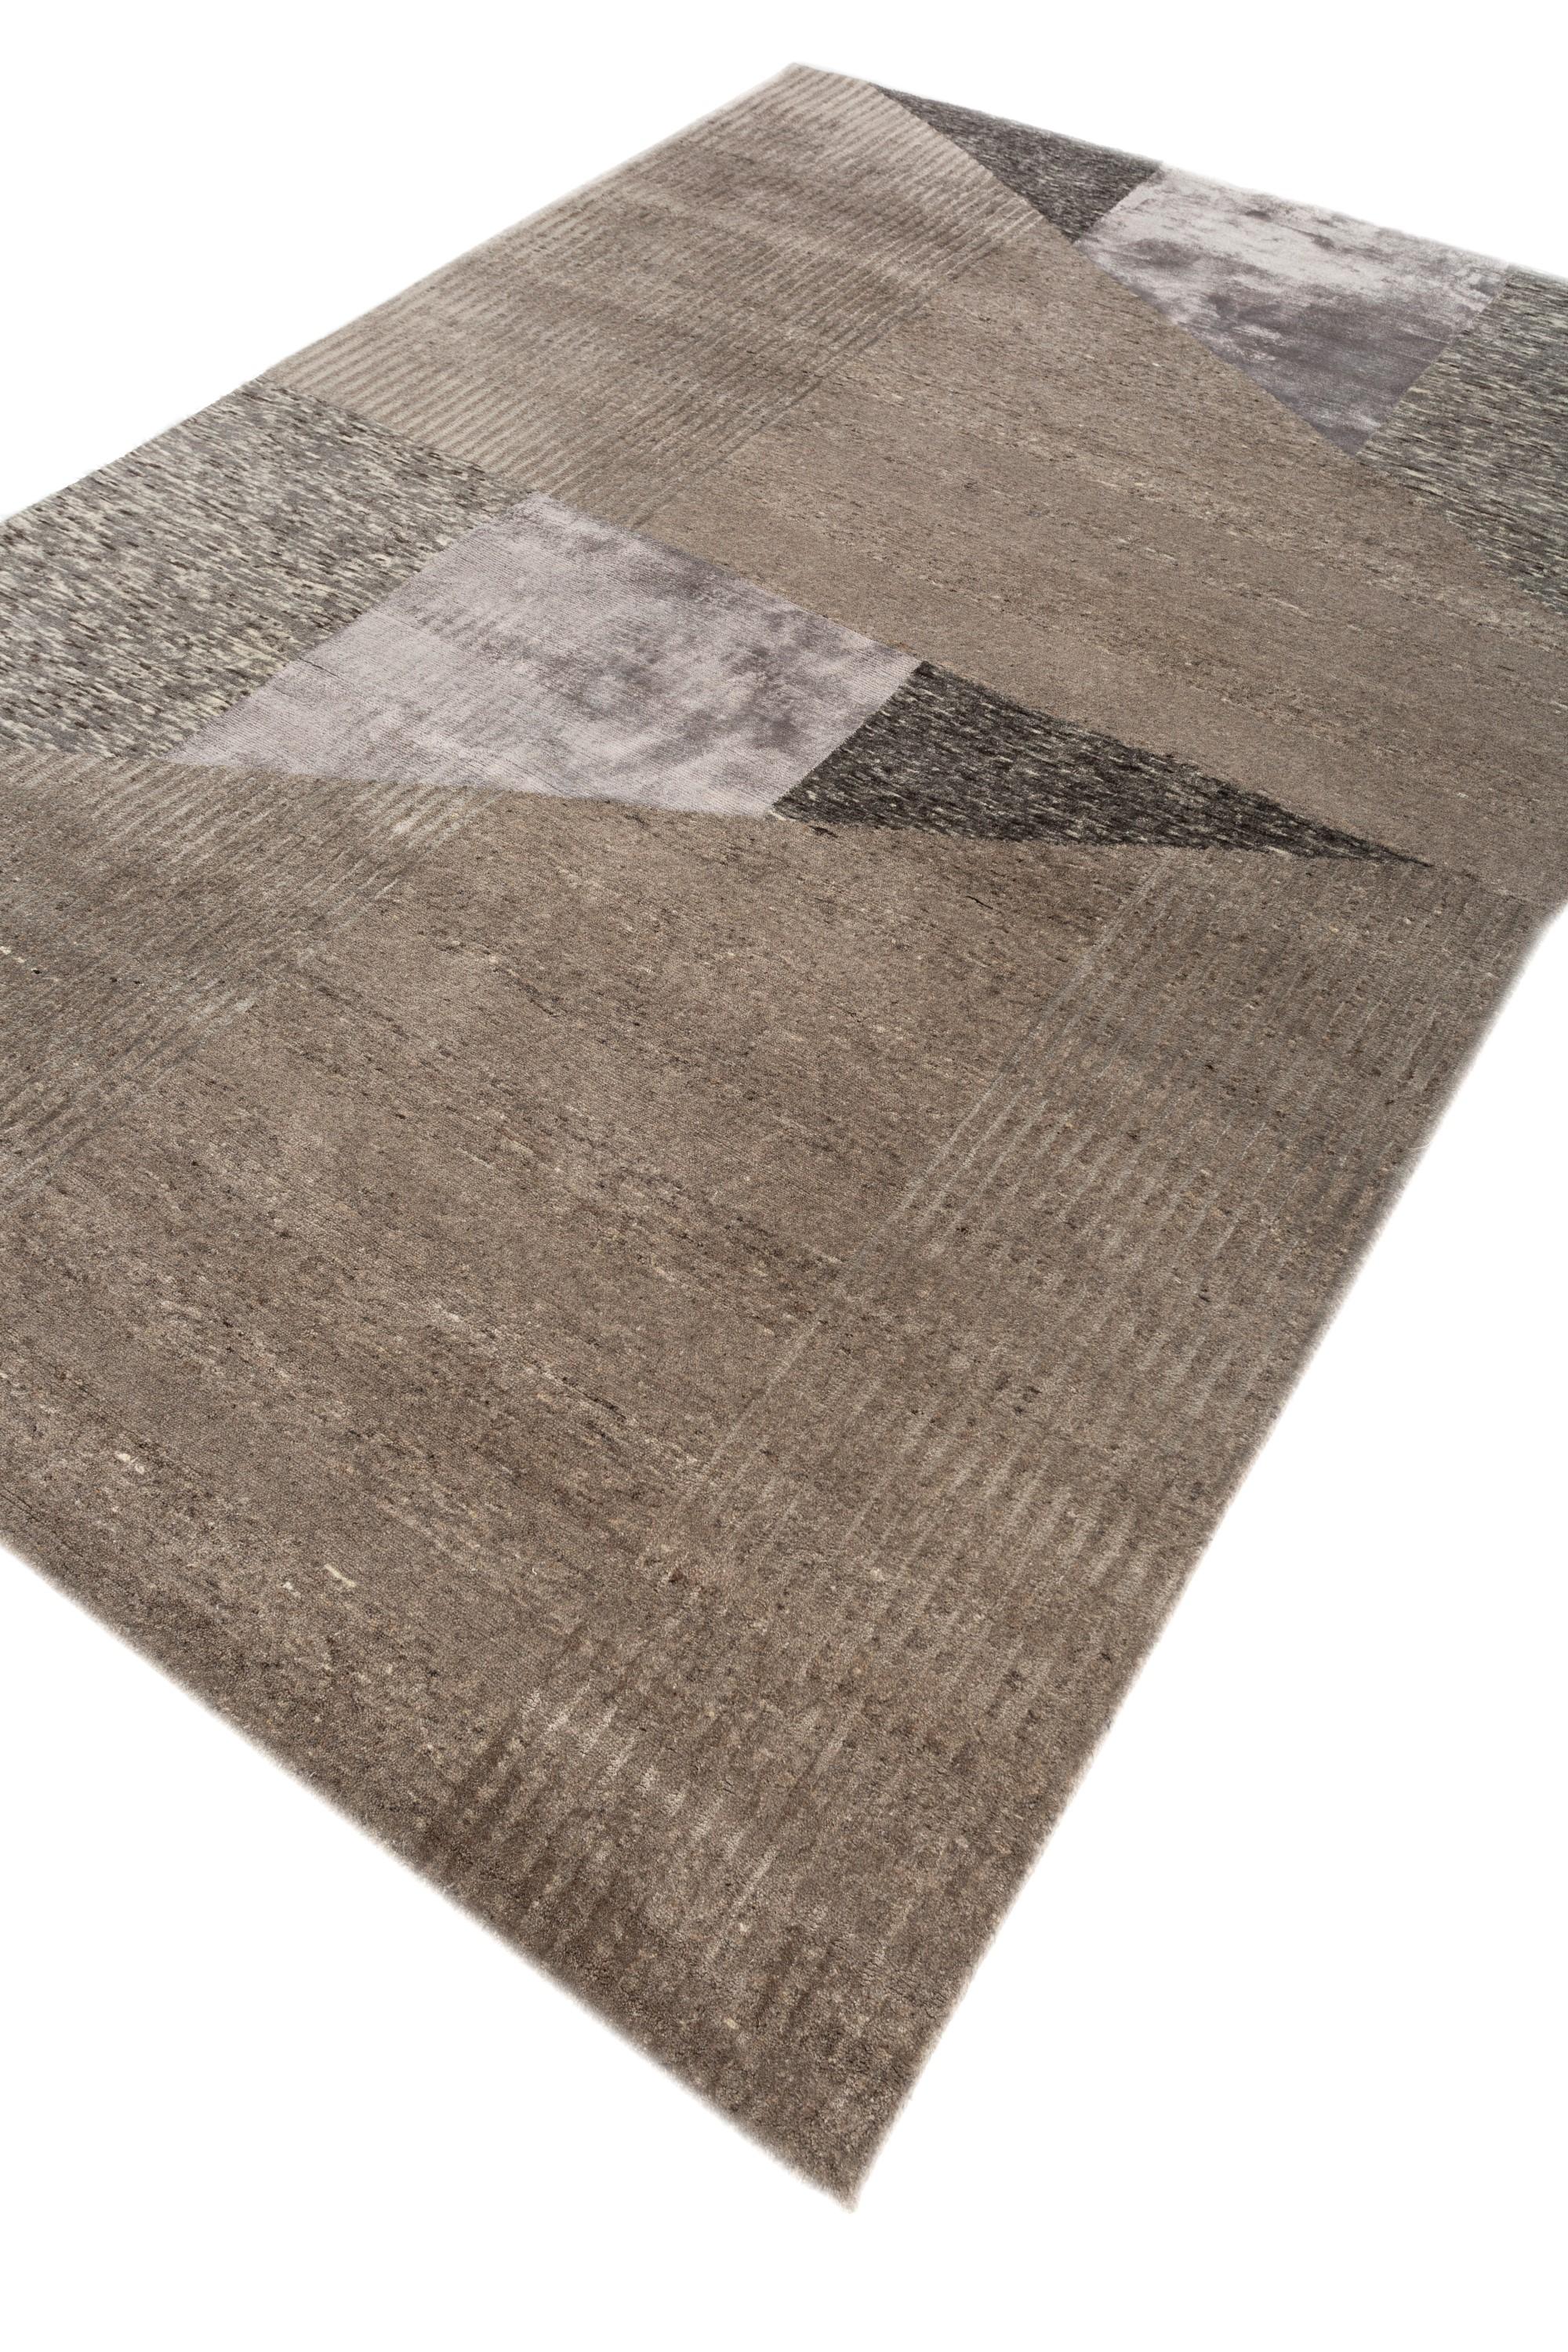 Indian Earthy Enigma Natural Soot & Natural Taupe 180x270 cm Hand Knotted Rug For Sale